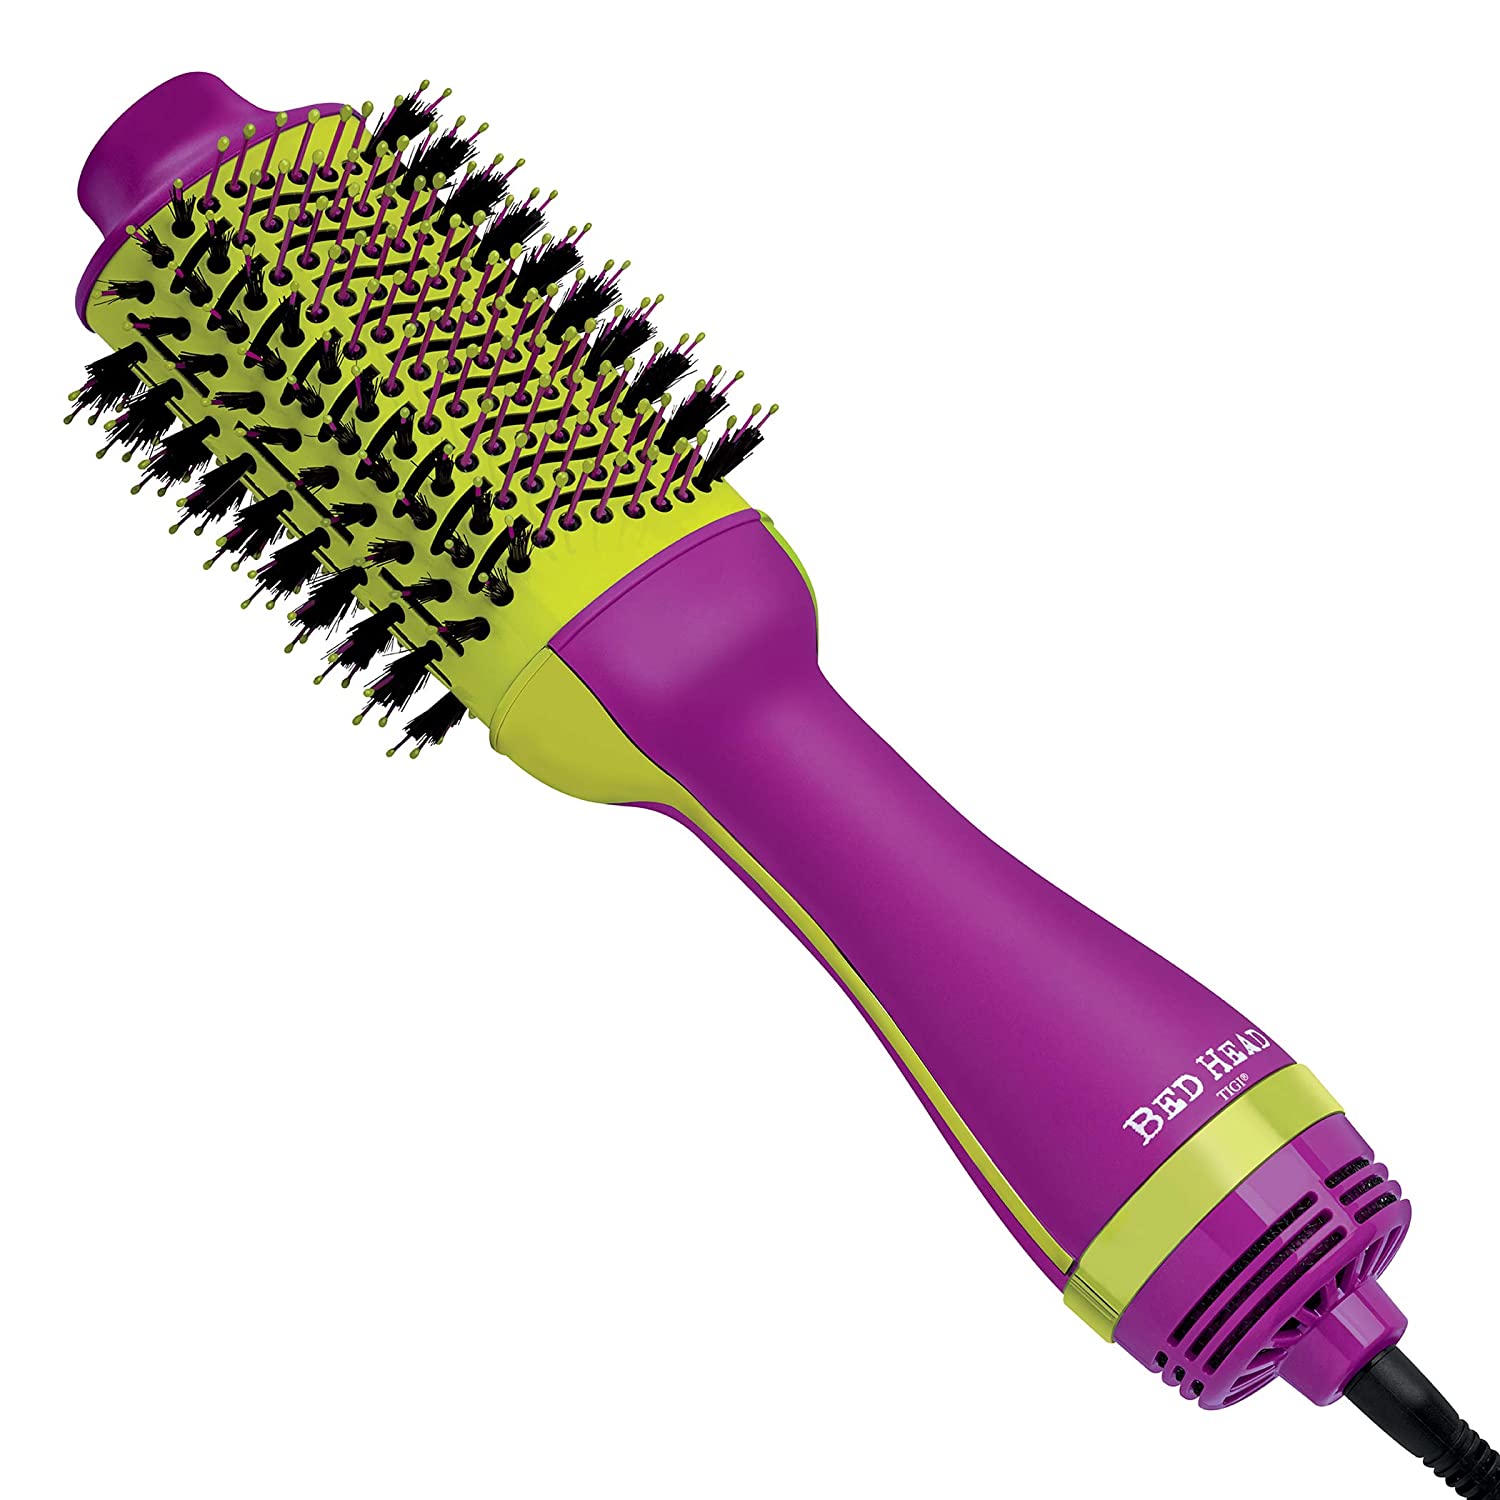 11 Best Blow Dryer Brushes You Need in Your Life Now